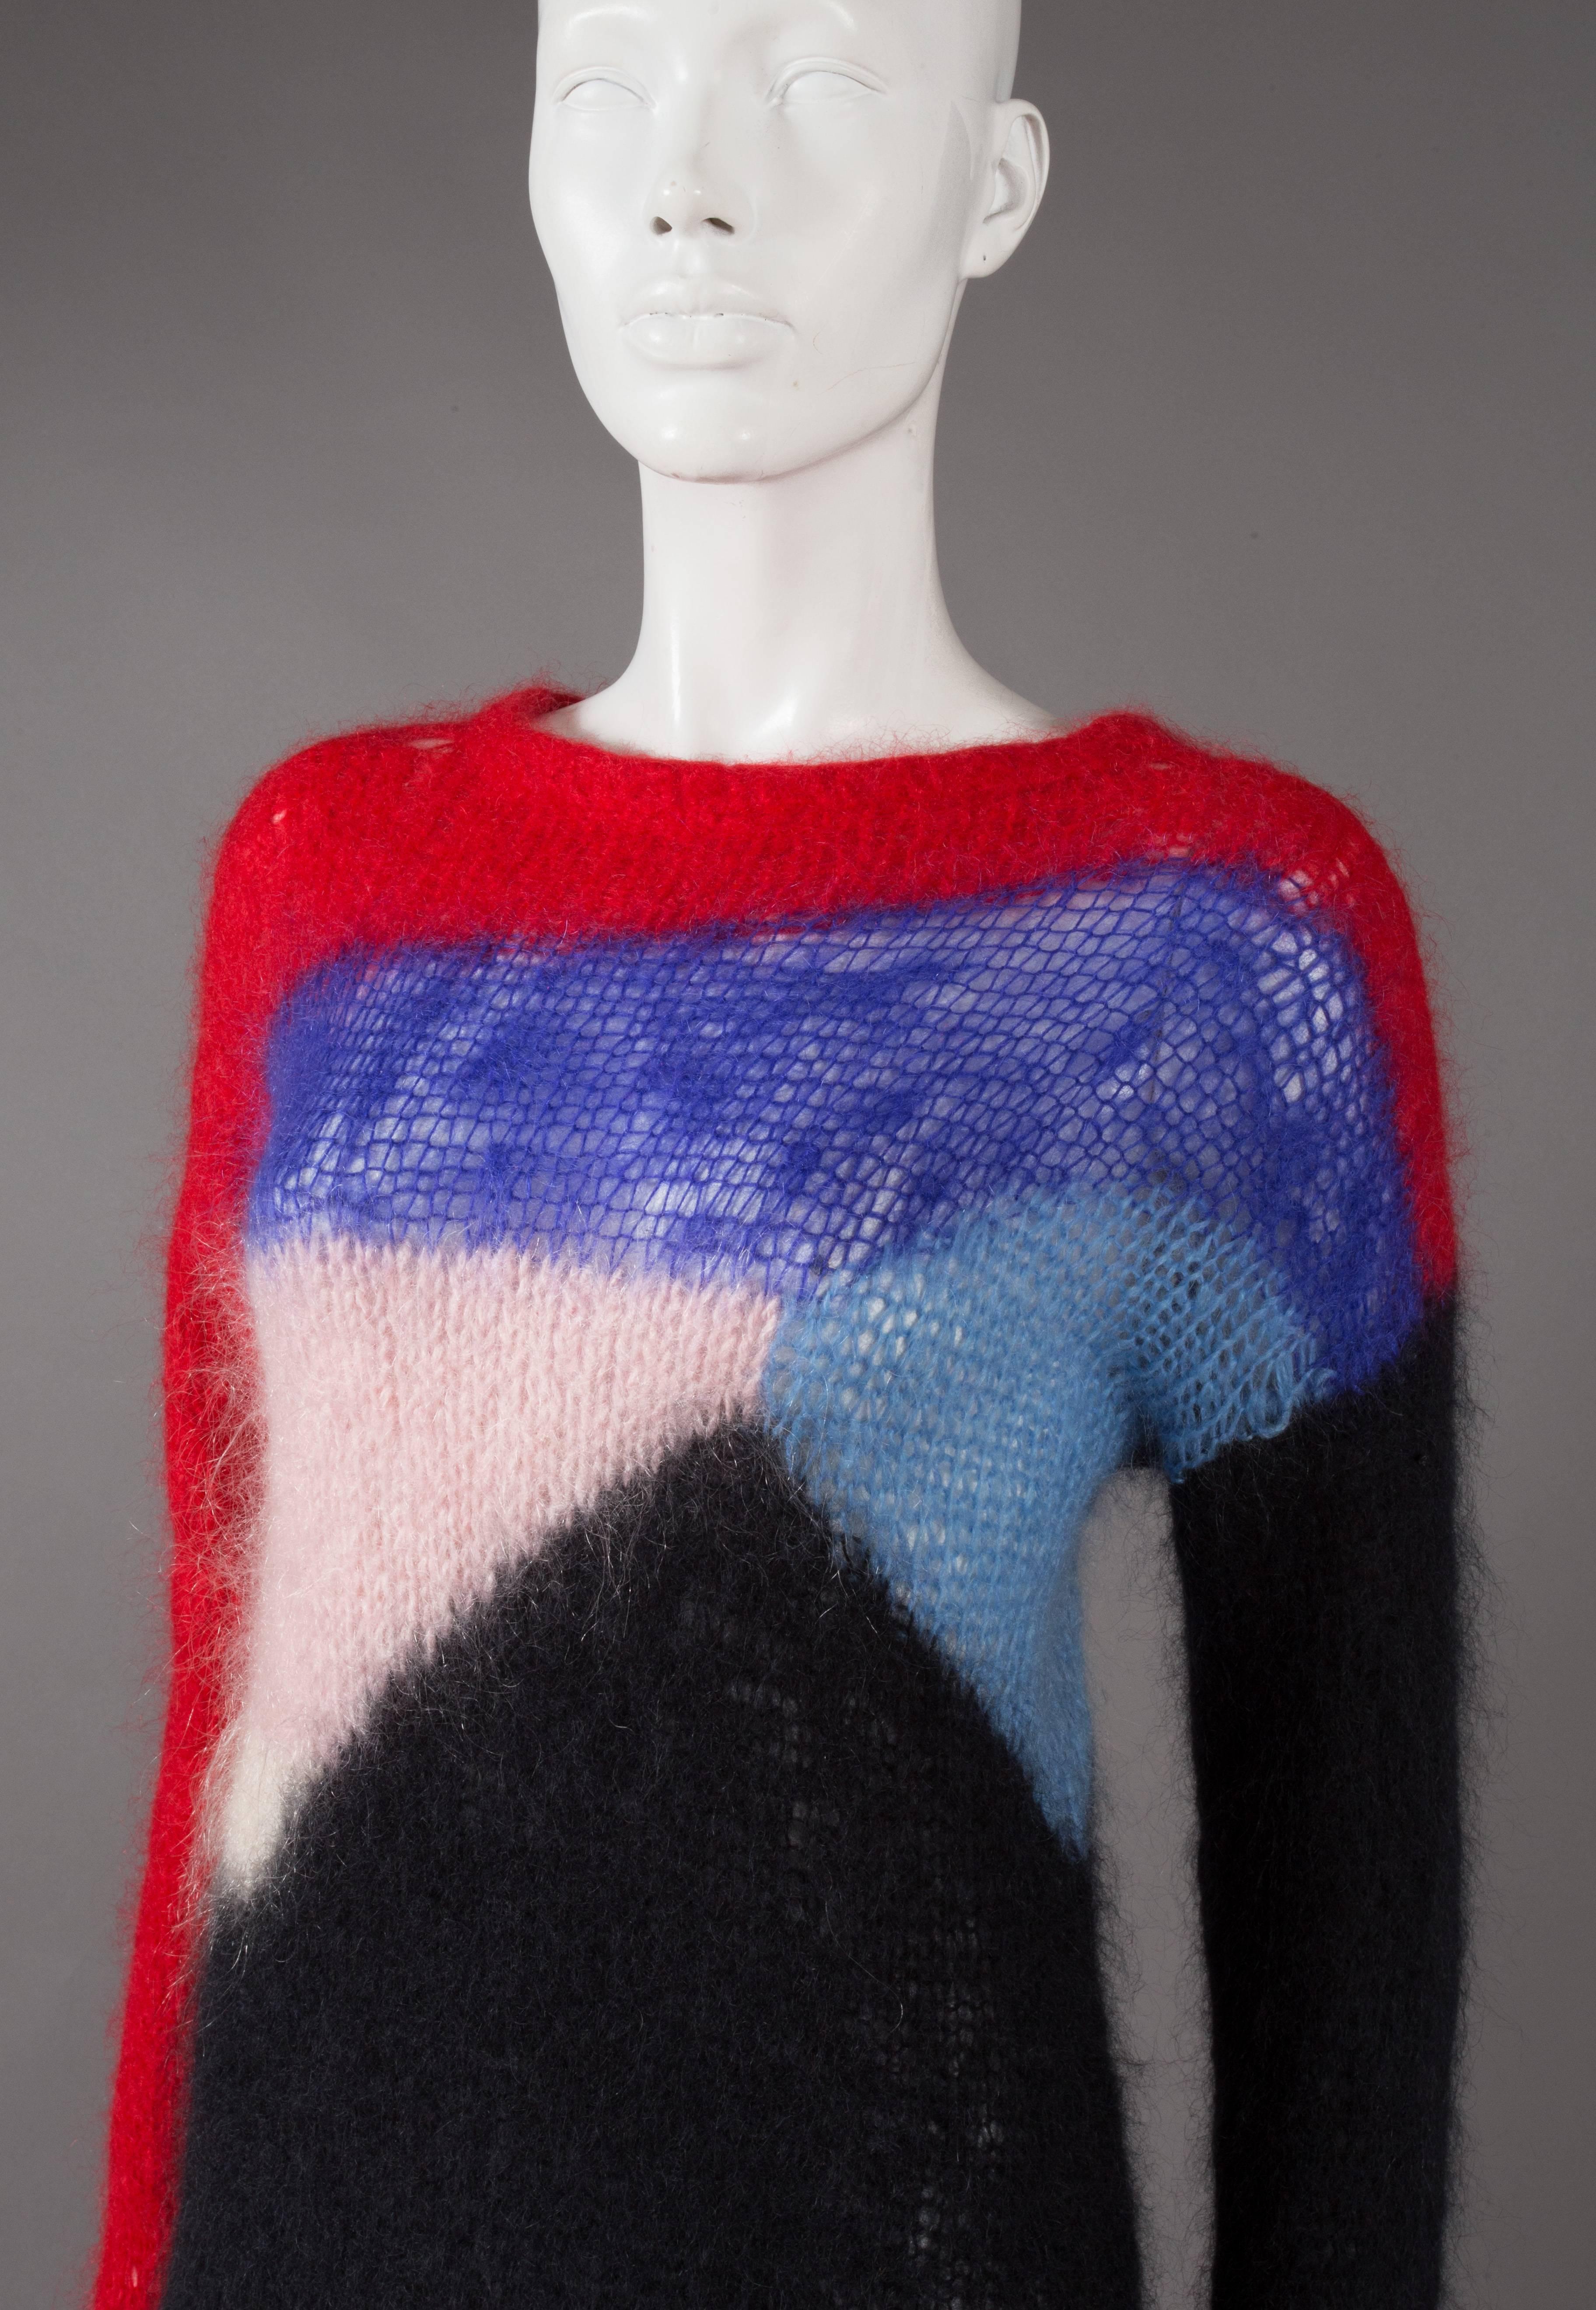 Extremely rare  Malcolm McLaren and Vivienne Westwood mohair SEDITIONARIES sweater, circa 1976. 

This multi-coloured mohair sweater was made for Malcolm McLaren and Vivienne Westwood's SEDITIONARIES punk store in Kings Road, Chelsea. It was the